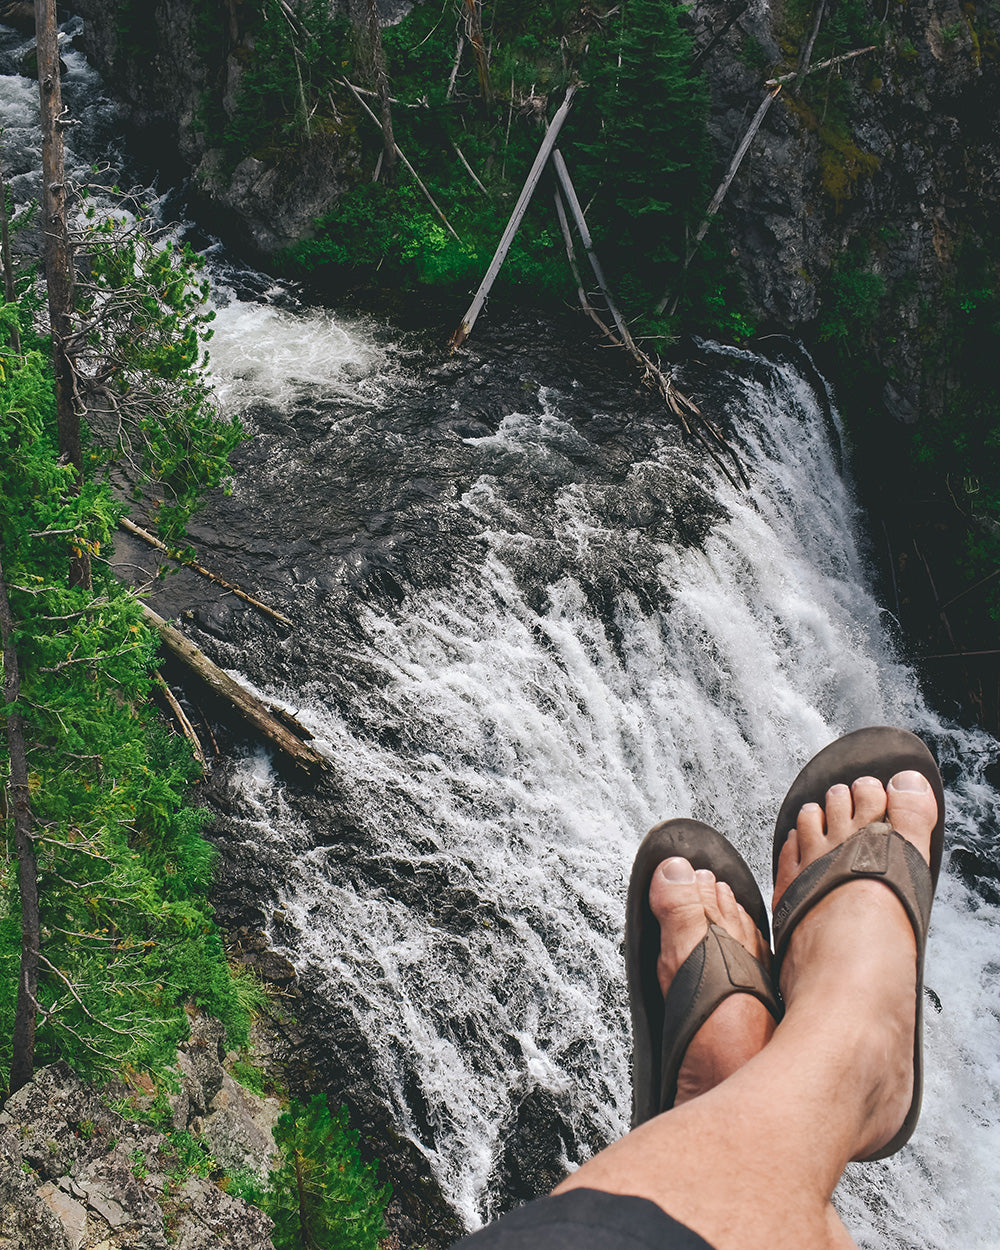 Always take a pair of flip flops camping. They come in handy for showers and when nature calls in the middle of the night. Or if you are like us you wear them anytime even while doing a little exploring!